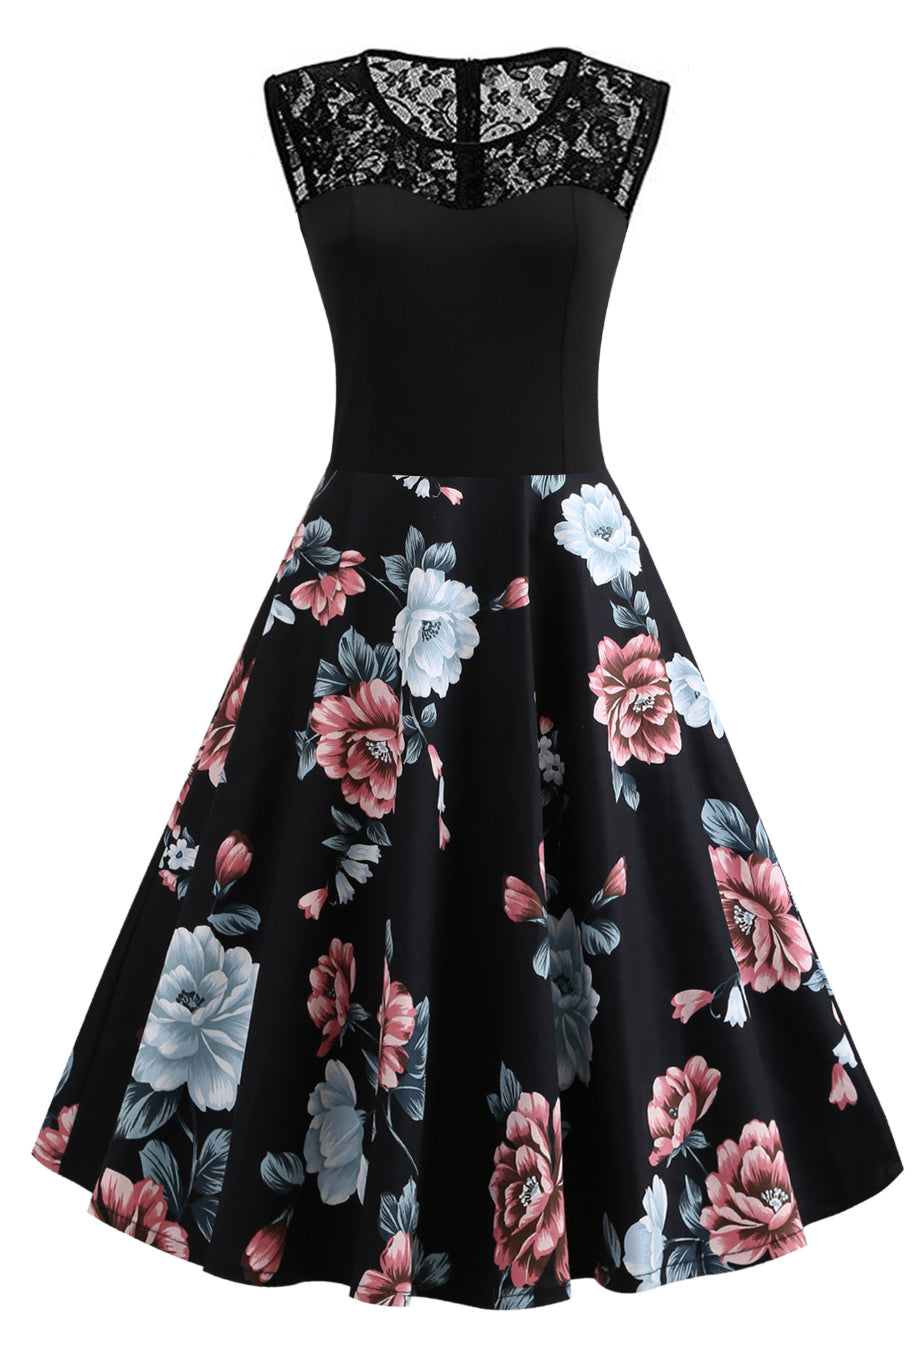 5 Styles of Floral Sleeveless A-line Vintage Dress